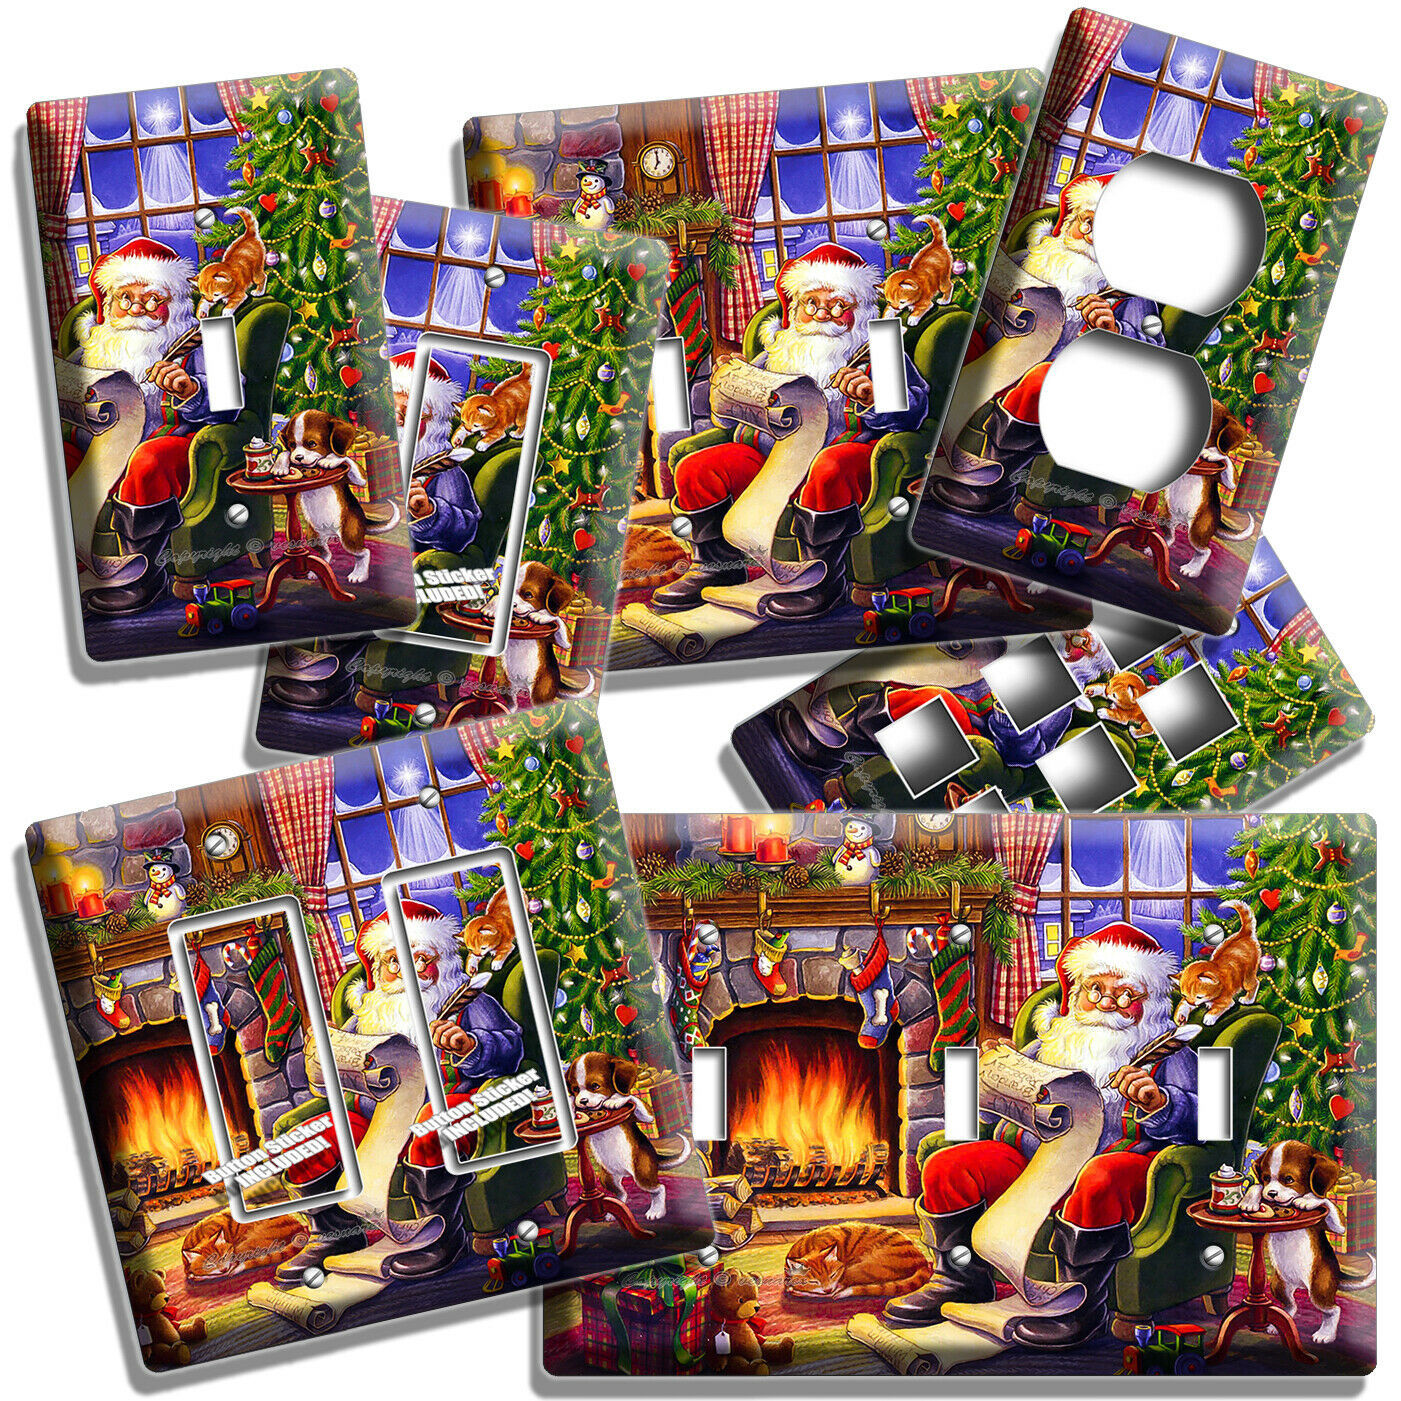 SANTA CLAUS RETRO CHRISTMAS TREE FIREPLACE LIGHT SWITCH OUTLET WALL PLATES DECOR - $17.99 - $28.99